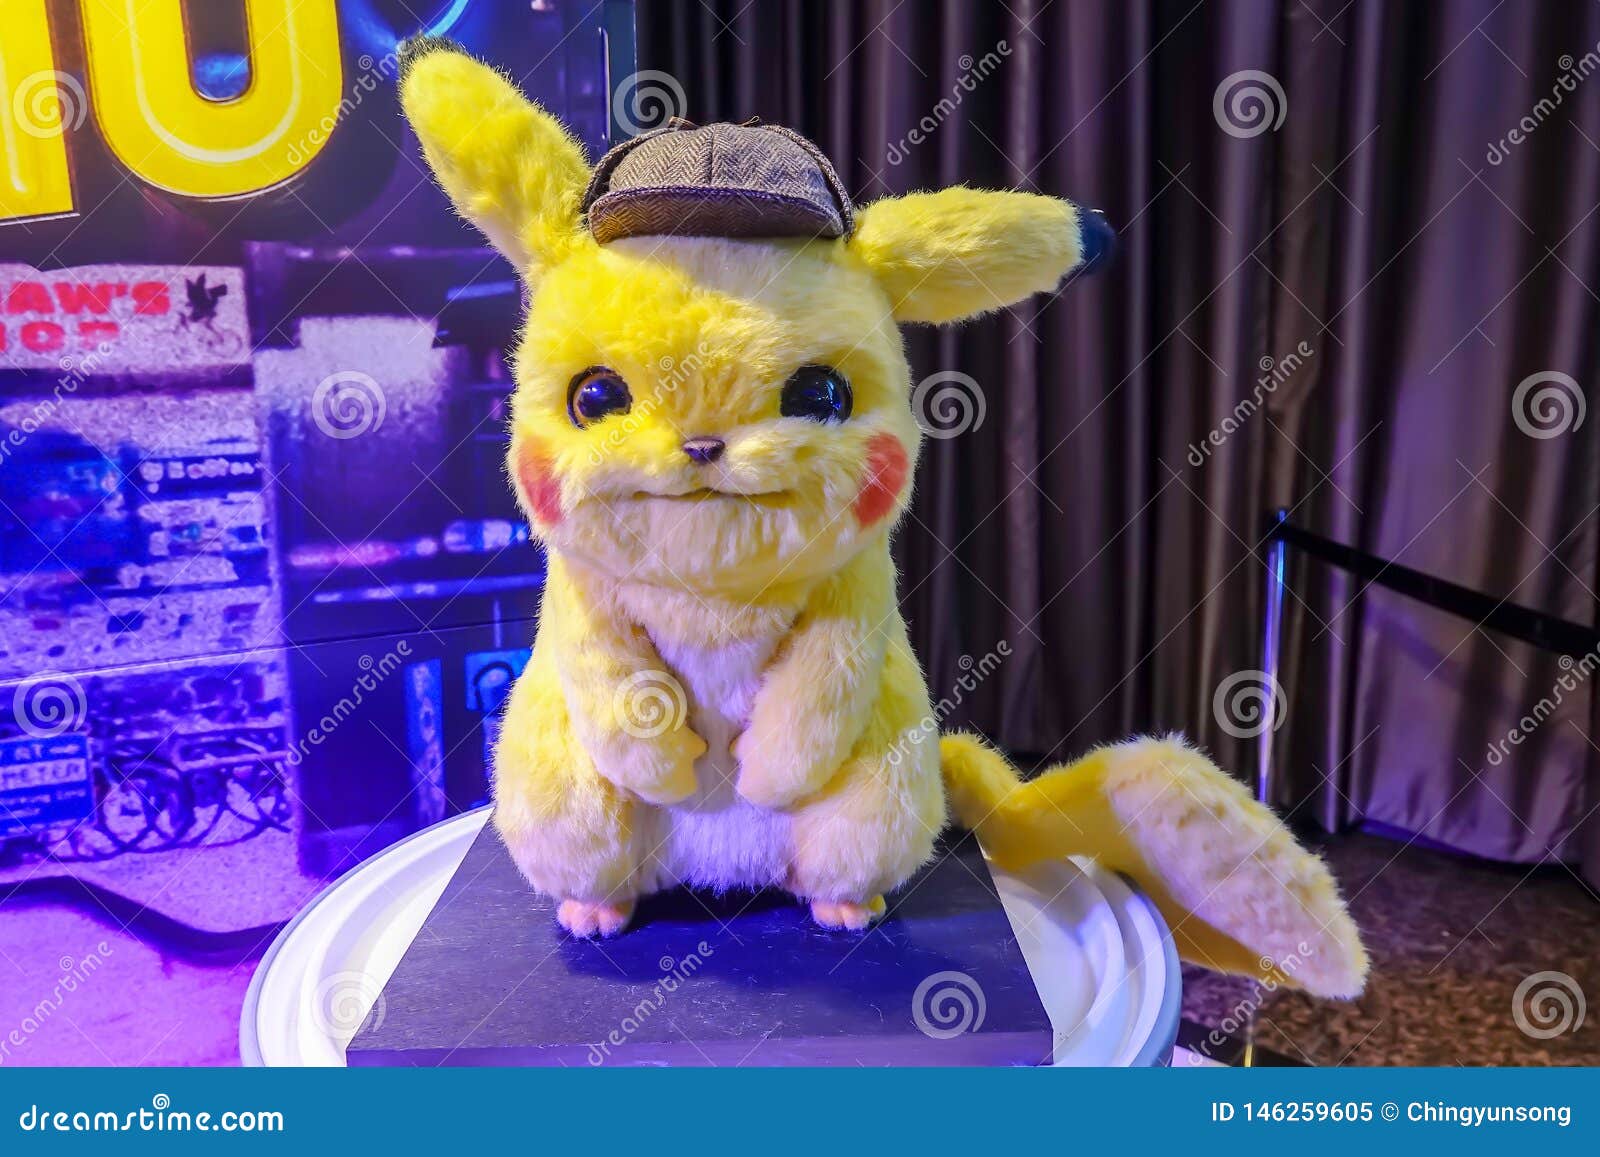 Pikachu Model With A Beautiful Standee Of A Movie Called